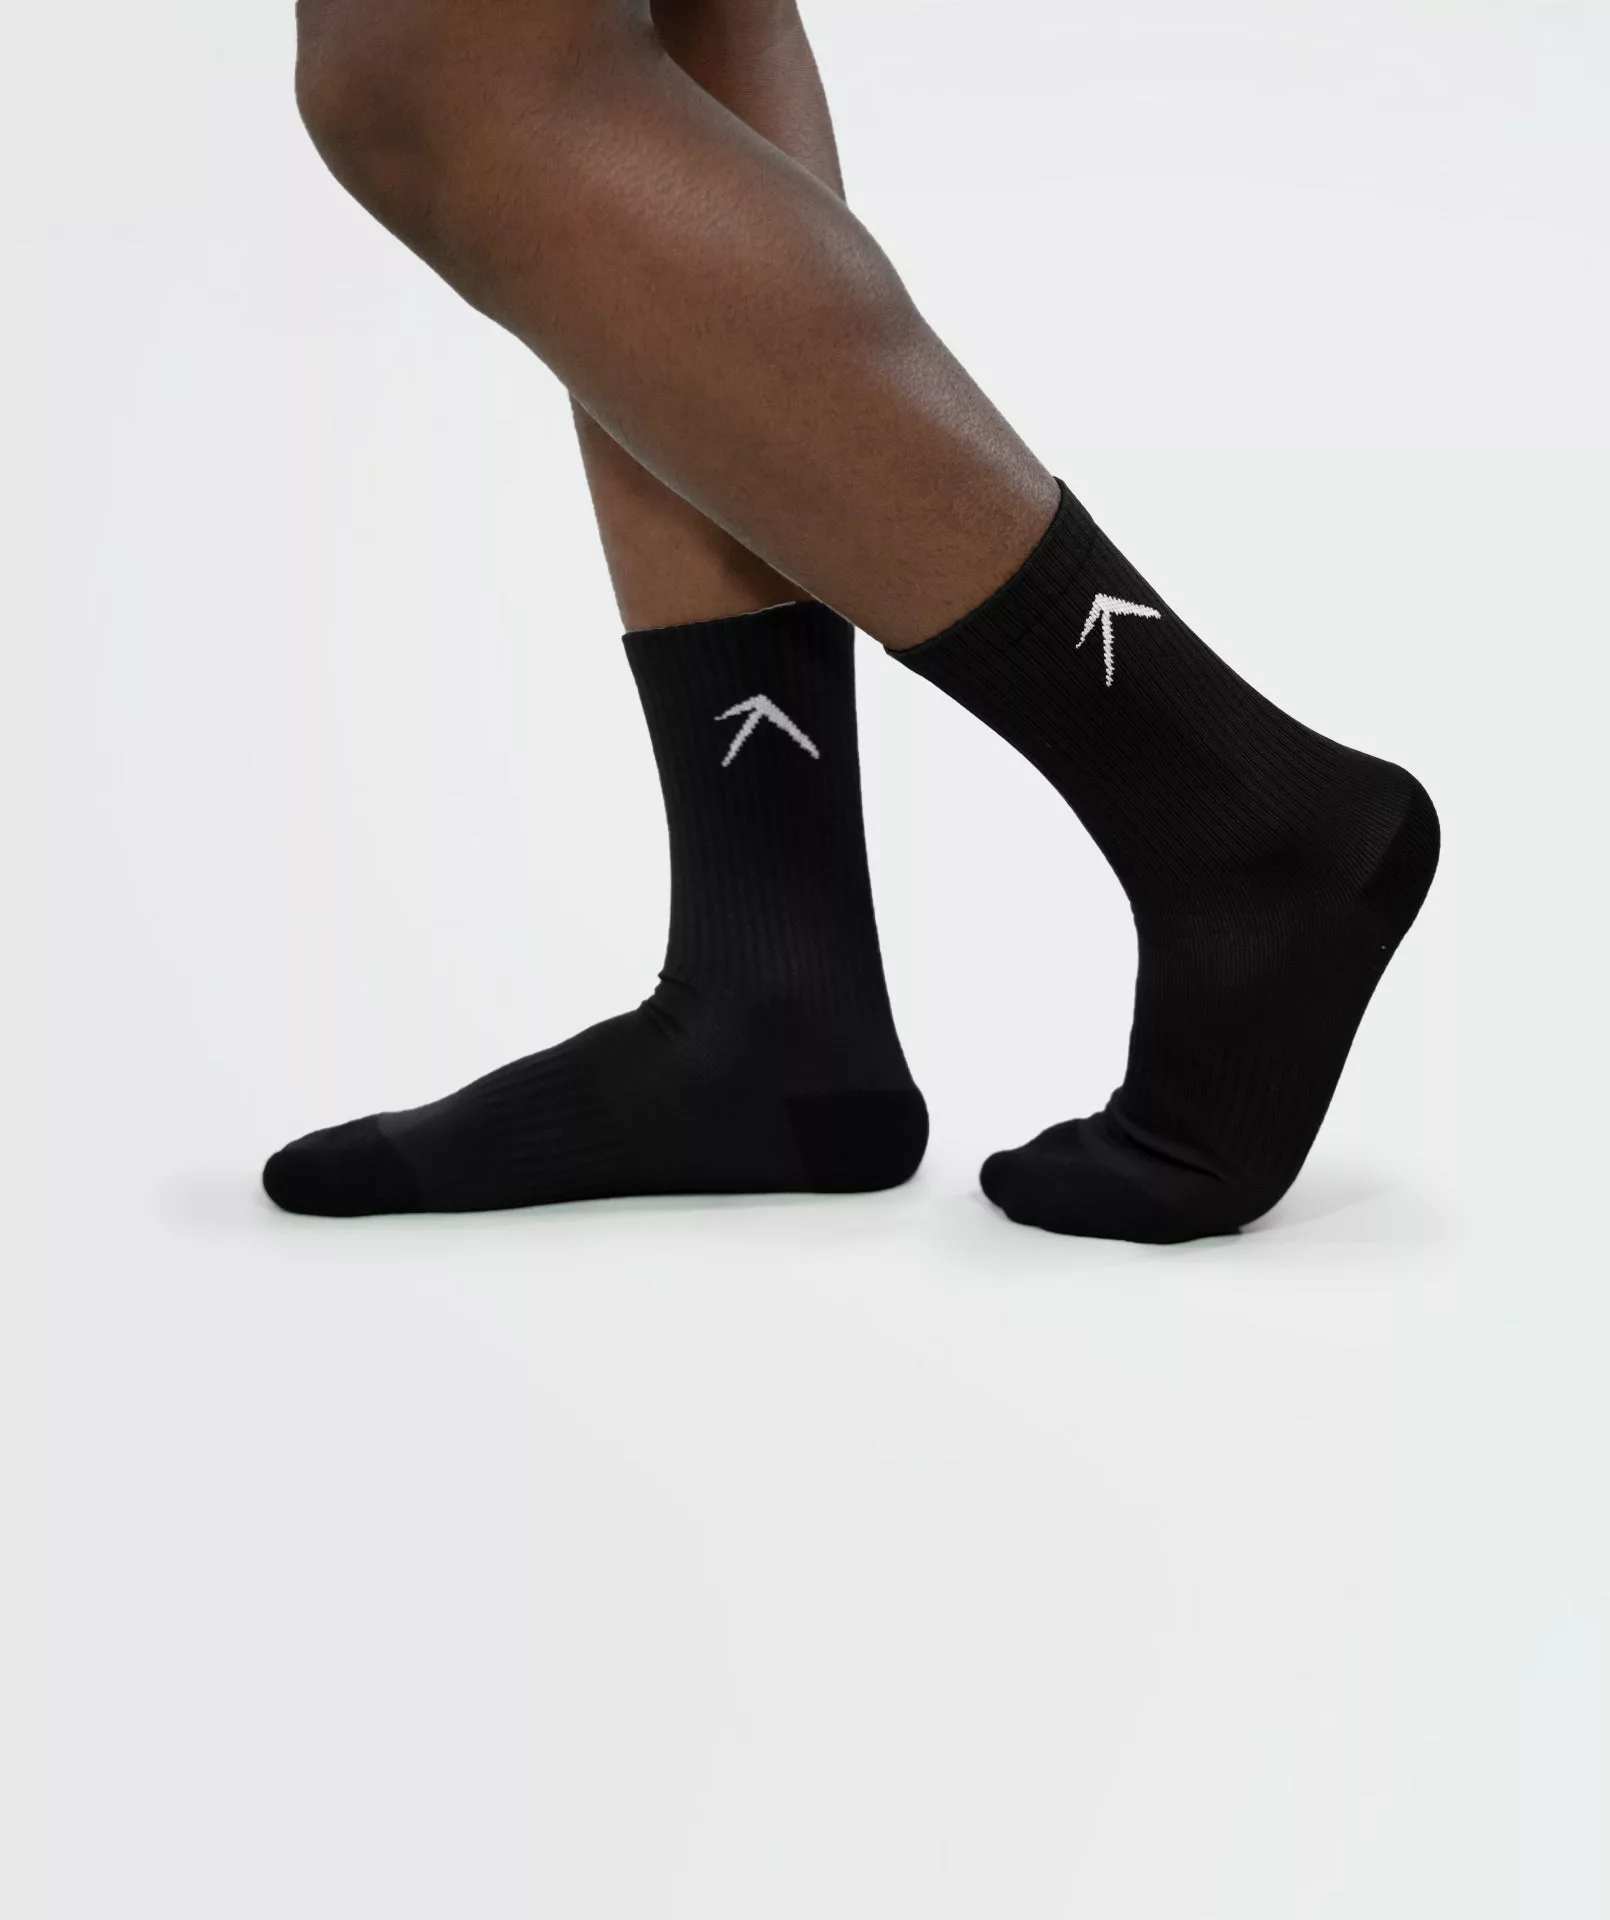 Unisex Crew Dry Touch Socks - Pack of 3 image 1